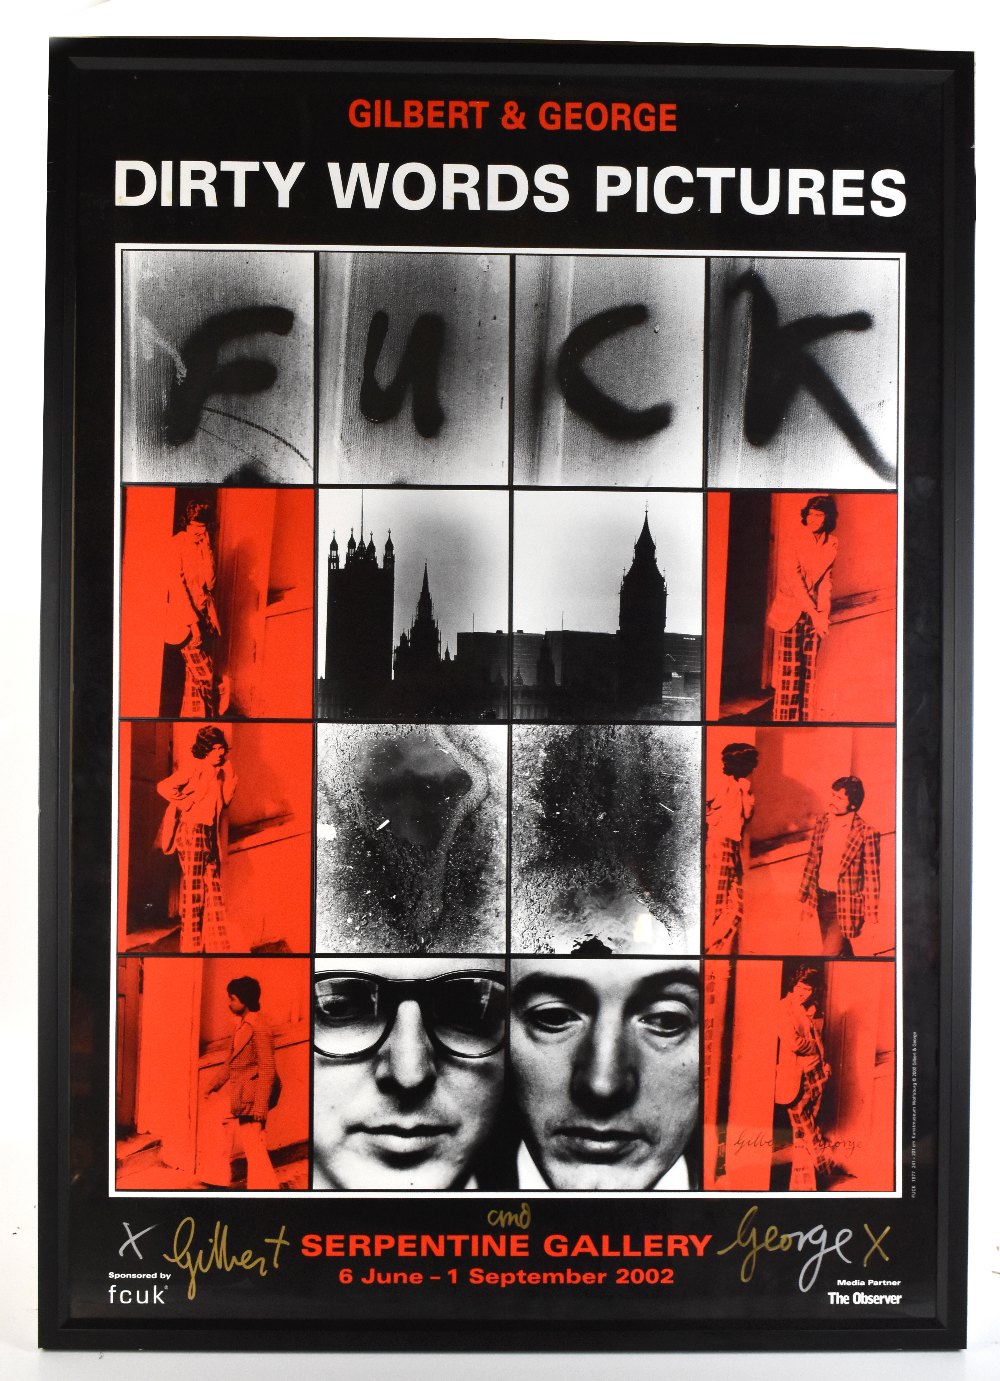 GILBERT & GEORGE (born 1943 and 1942); a signed poster for the 'Dirty Words Pictures Exhibition at